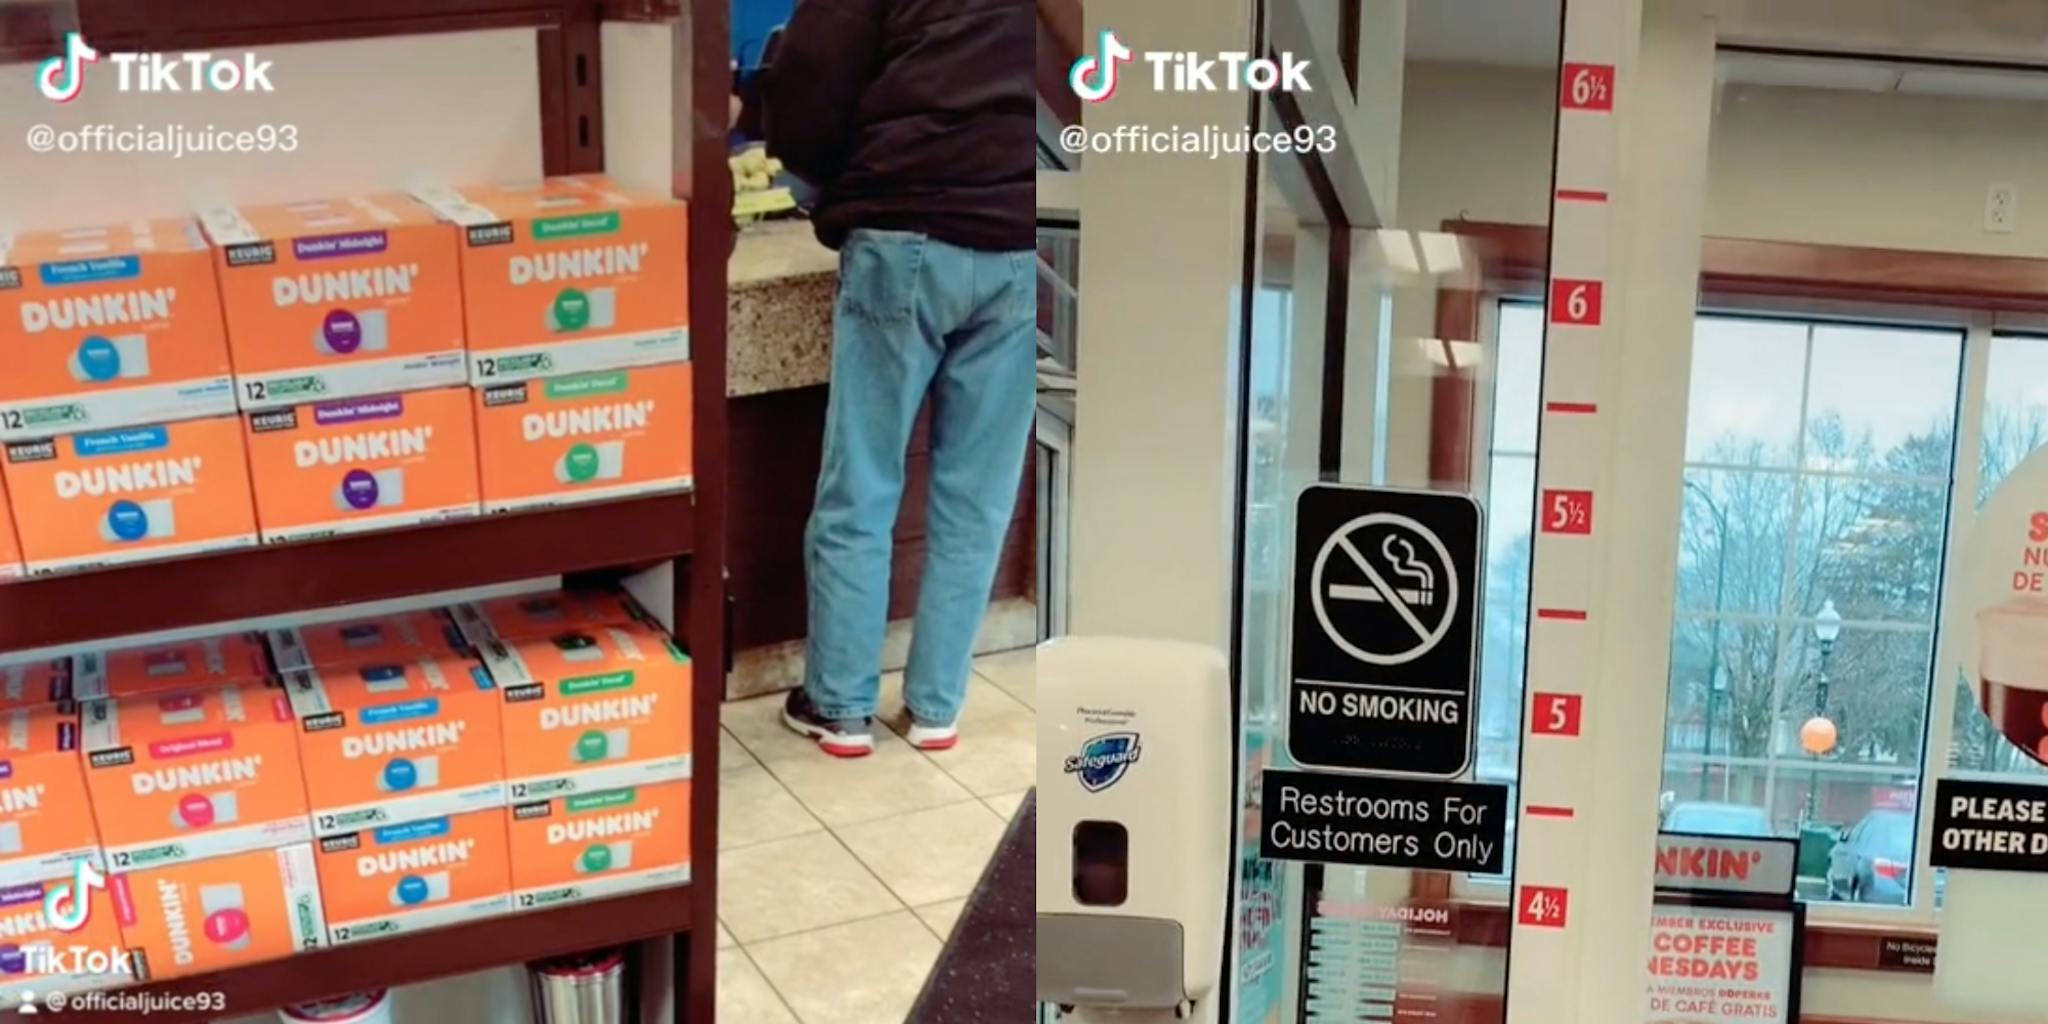 ‘Tell me your Dunkin’ has been robbed without telling me they’ve been robbed’: Viral TikTok shows height measurements on Dunkin’ door